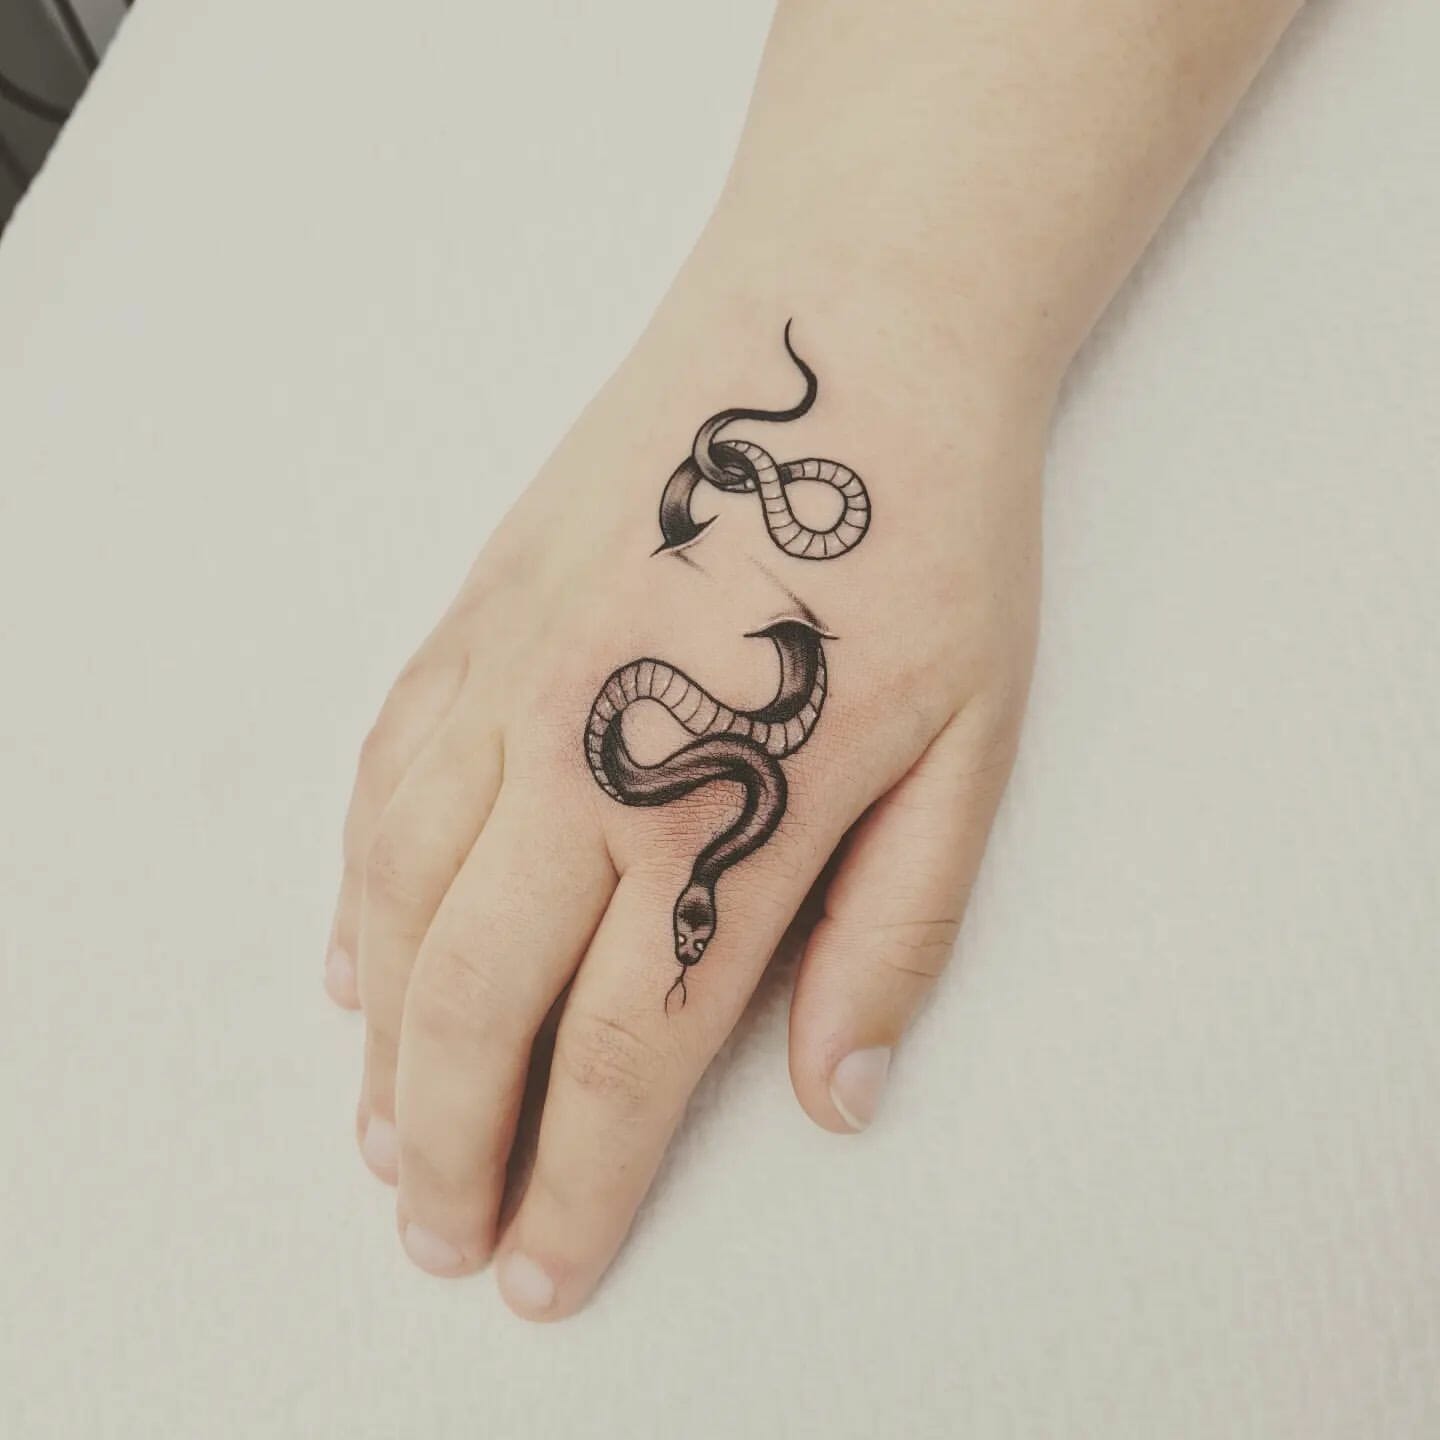 101 Best Small Snake Tattoo Ideas You Have To See To Believe! - Outsons